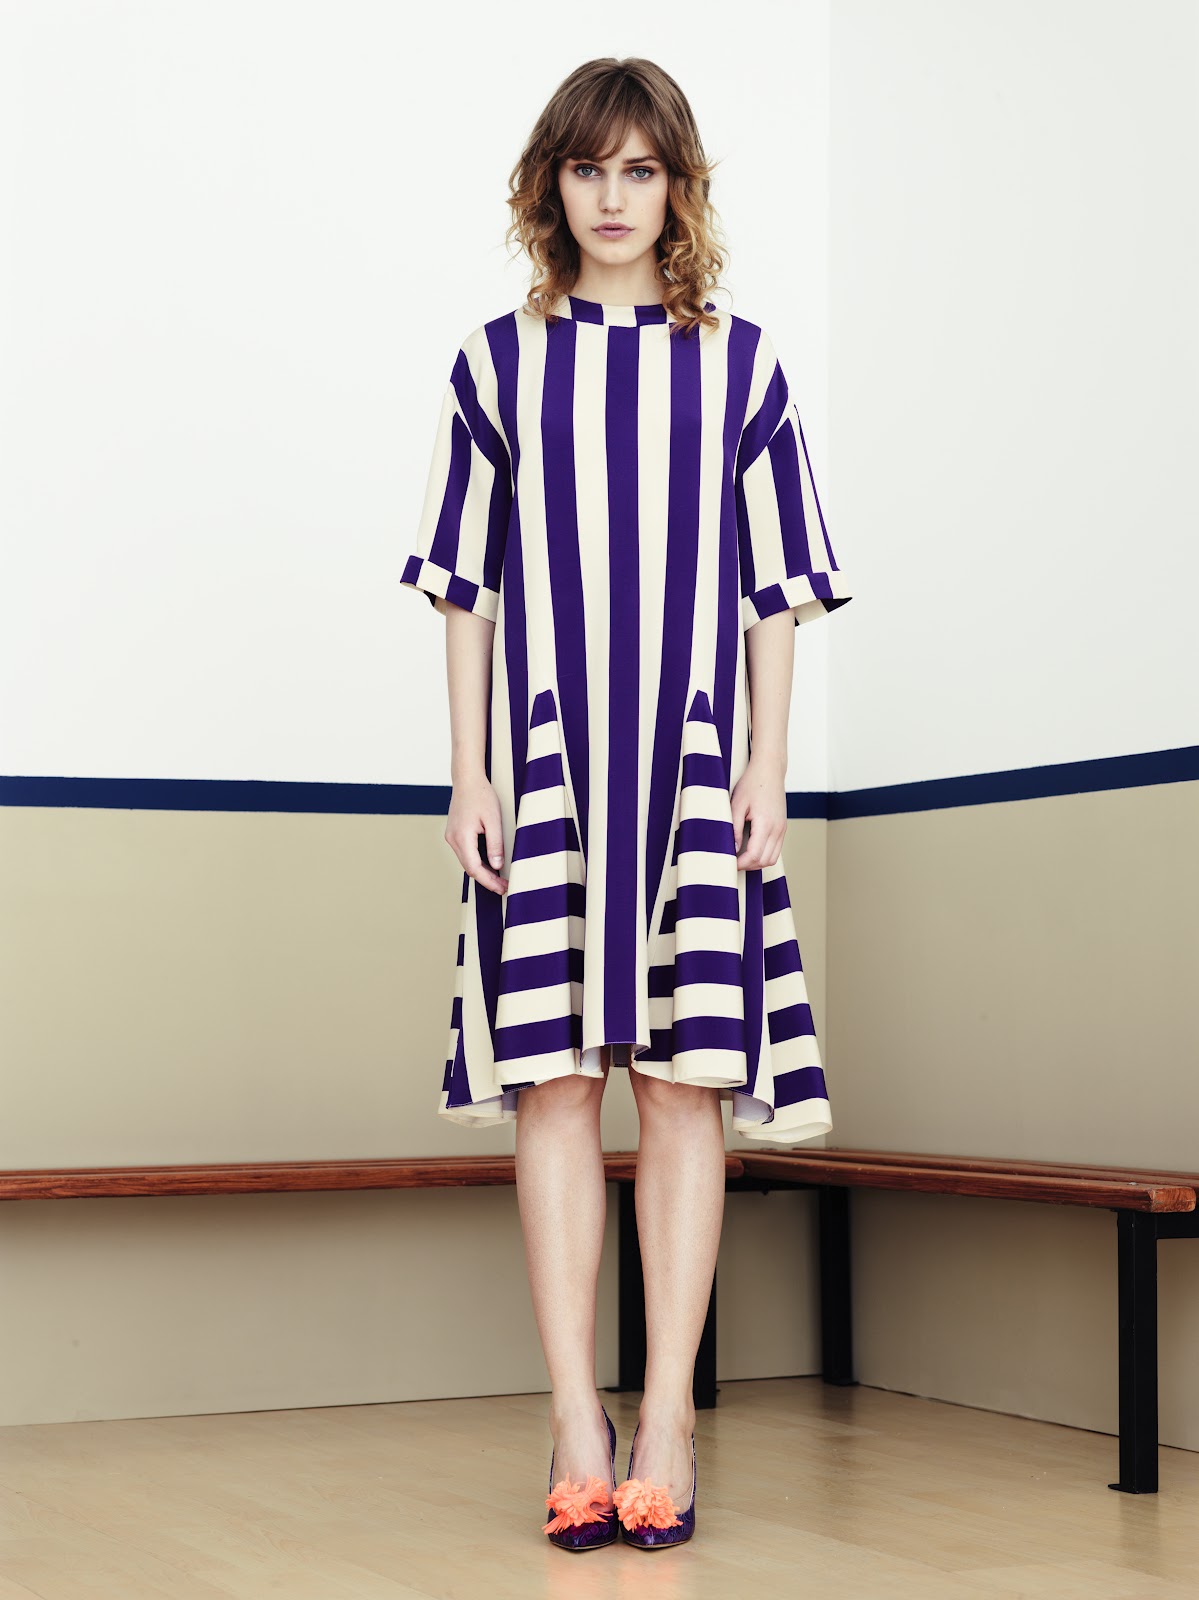 House of Holland: HOUSE OF HOLLAND PRE COLLECTION 2013